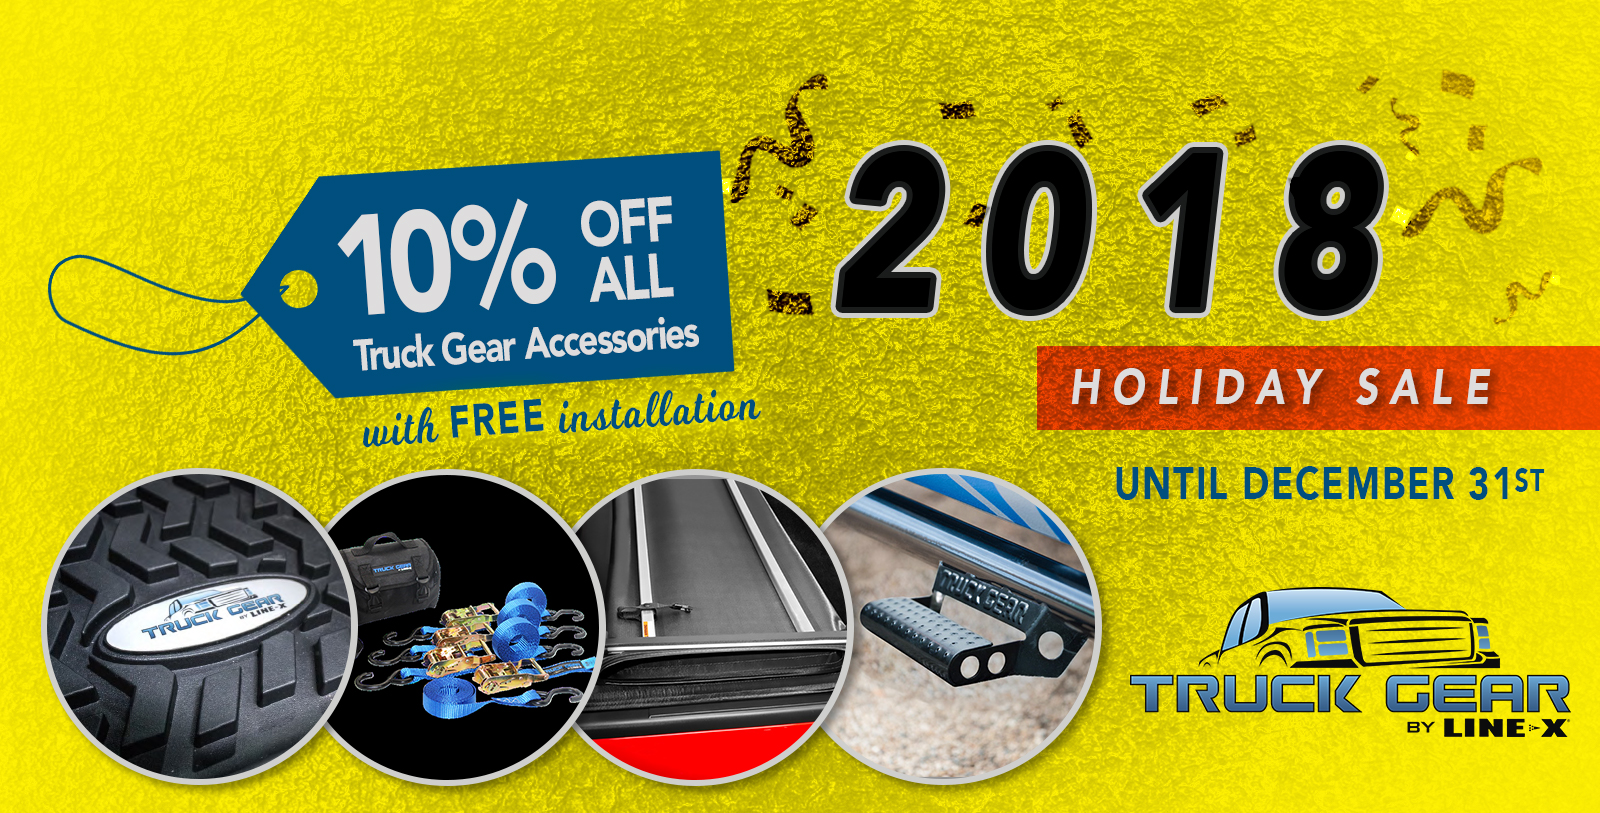 Holiday Sale: 10% Off ALL Truck Gear Accessories with FREE Installation